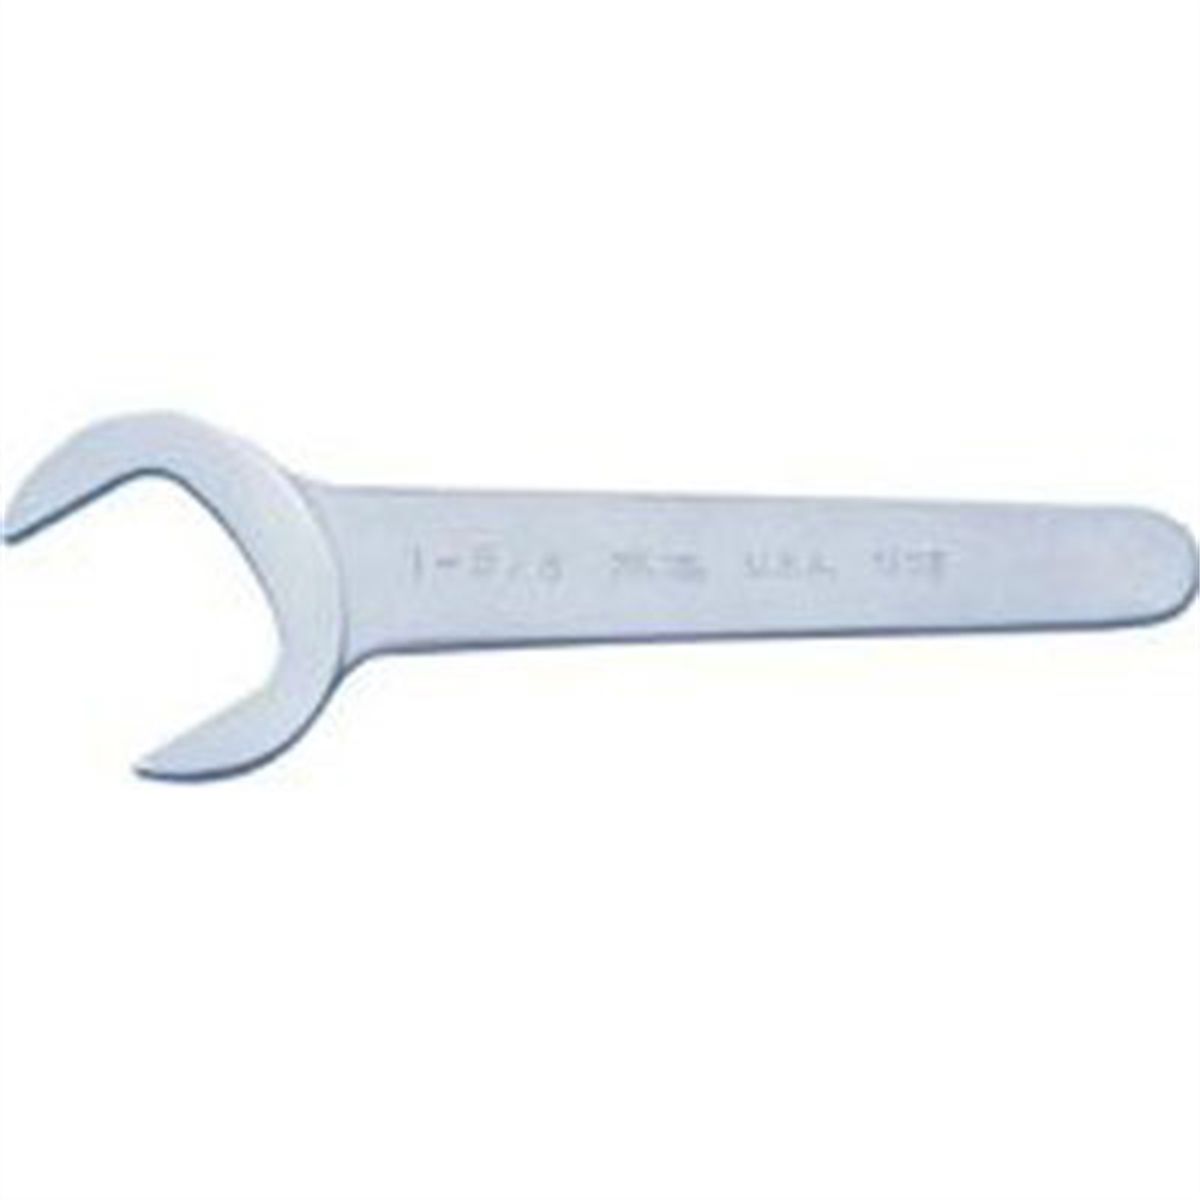 Chrome Service Wrench 30 Deg Angle - 1 In